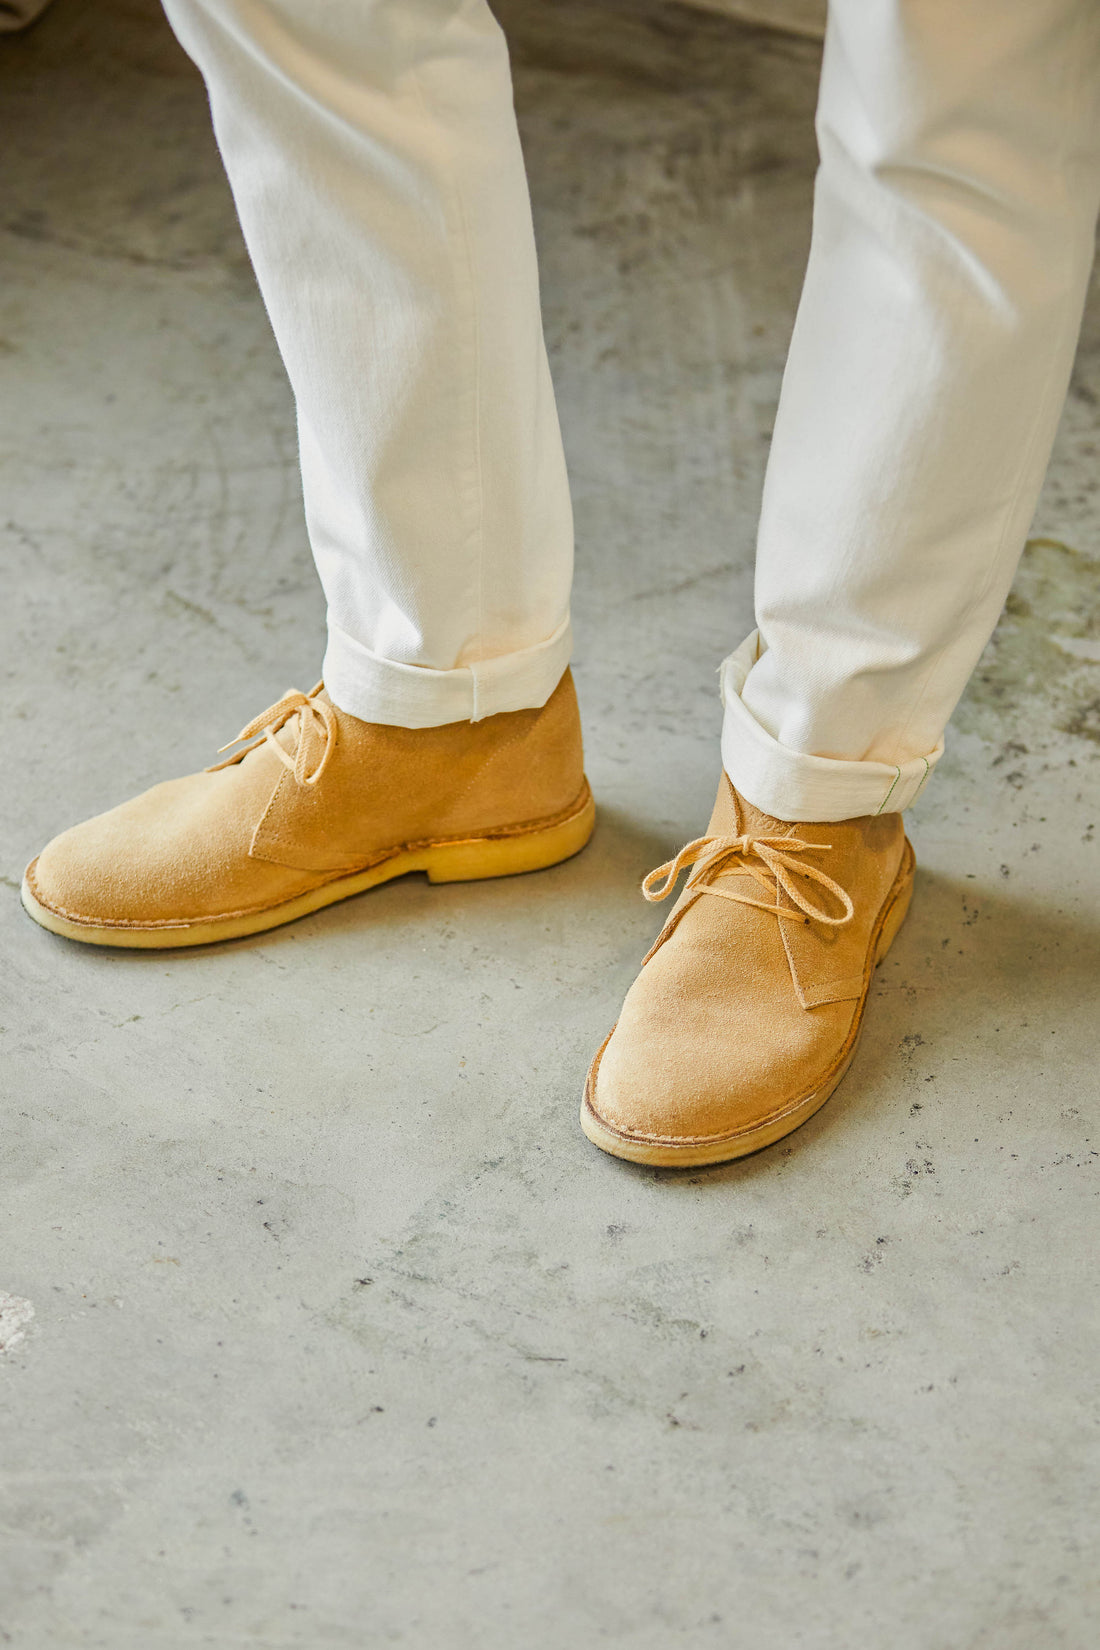 A person wearing tan suede shoes and white pants standing on a concrete surface.